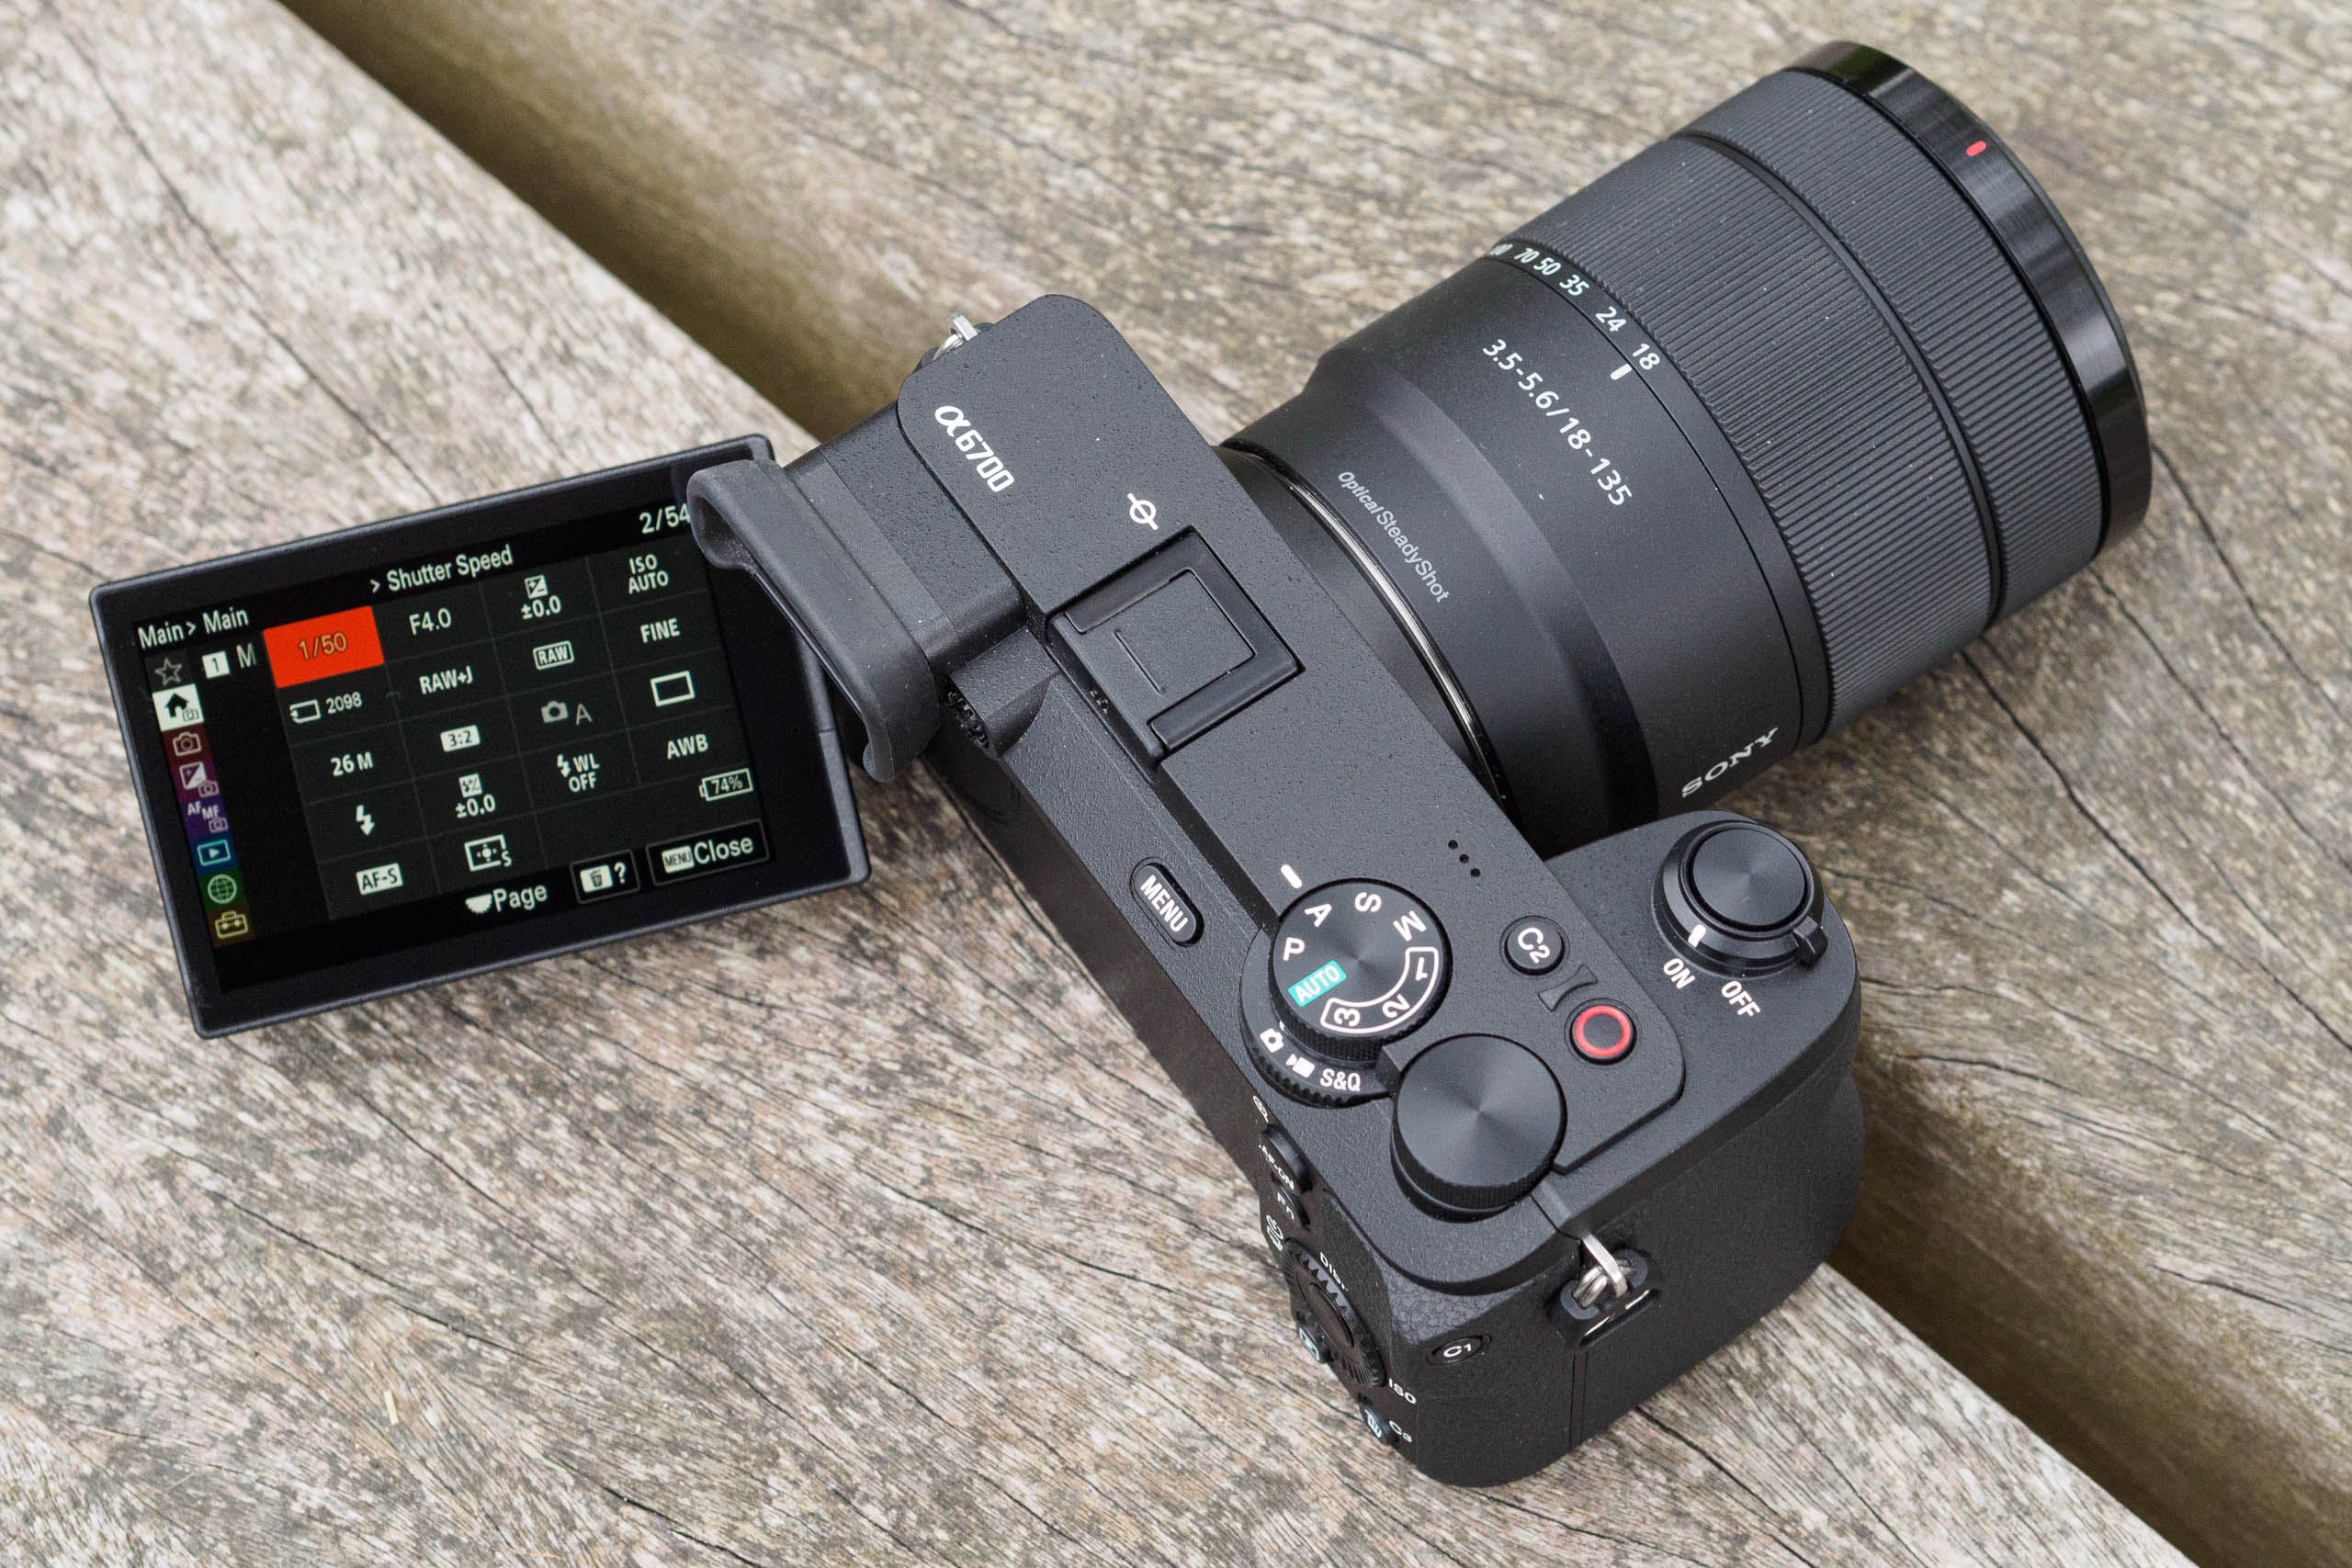 Sony Alpha A6700 Review - Performance